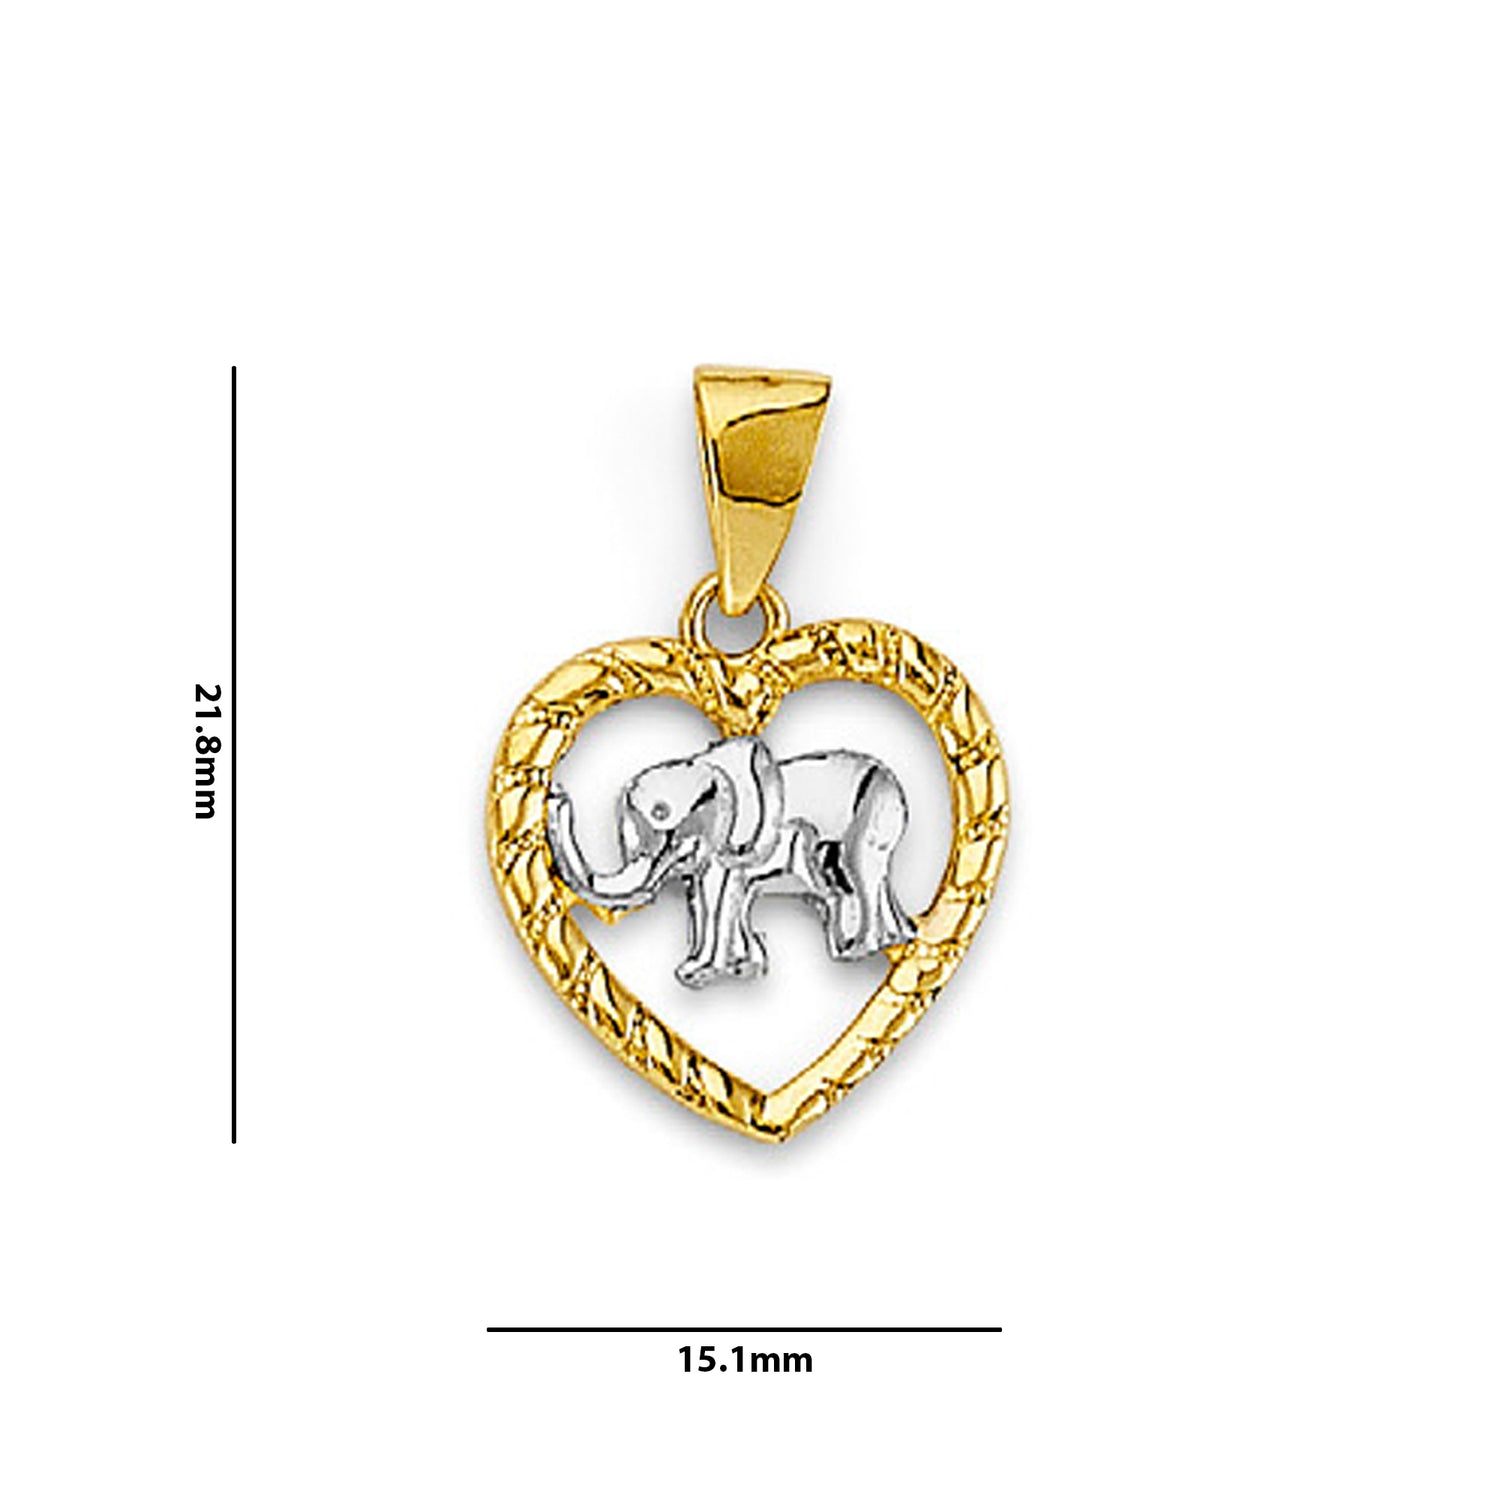 Two Tone Gold Rope Textured Open Heart Elephant Charm Pendant with Measurement